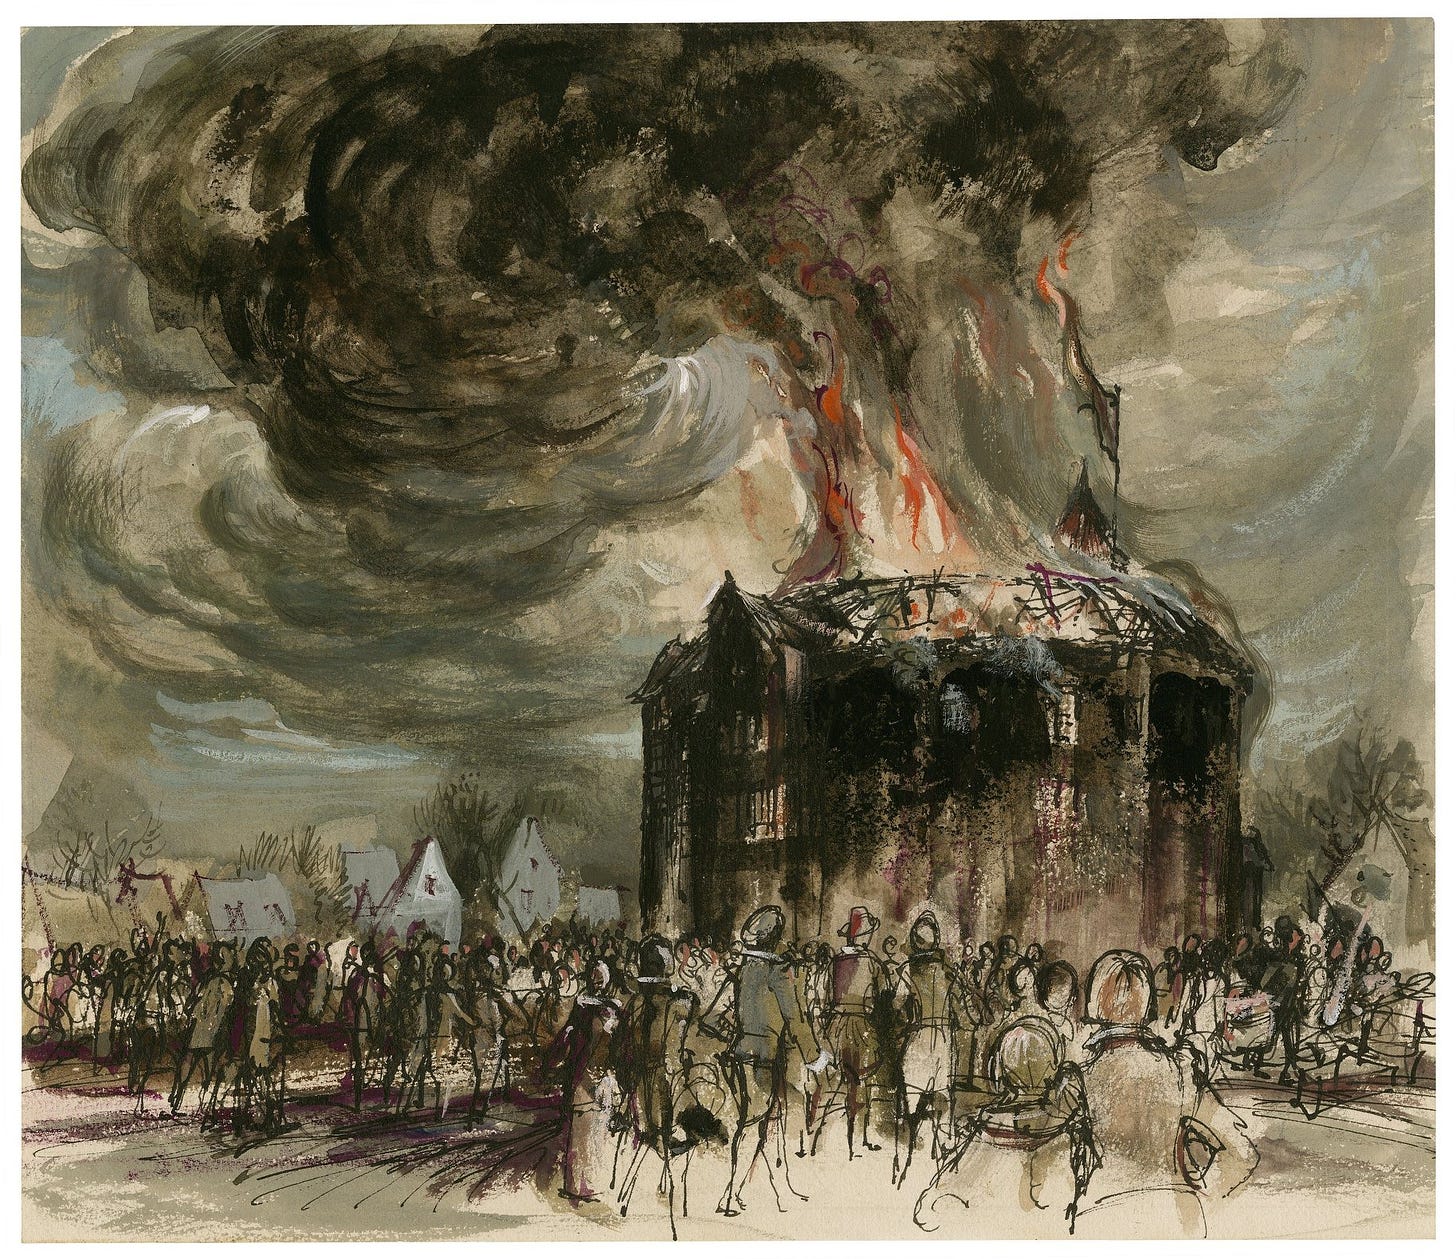 Watercolor illustration of the Globe burning by C. Walter Hodges.